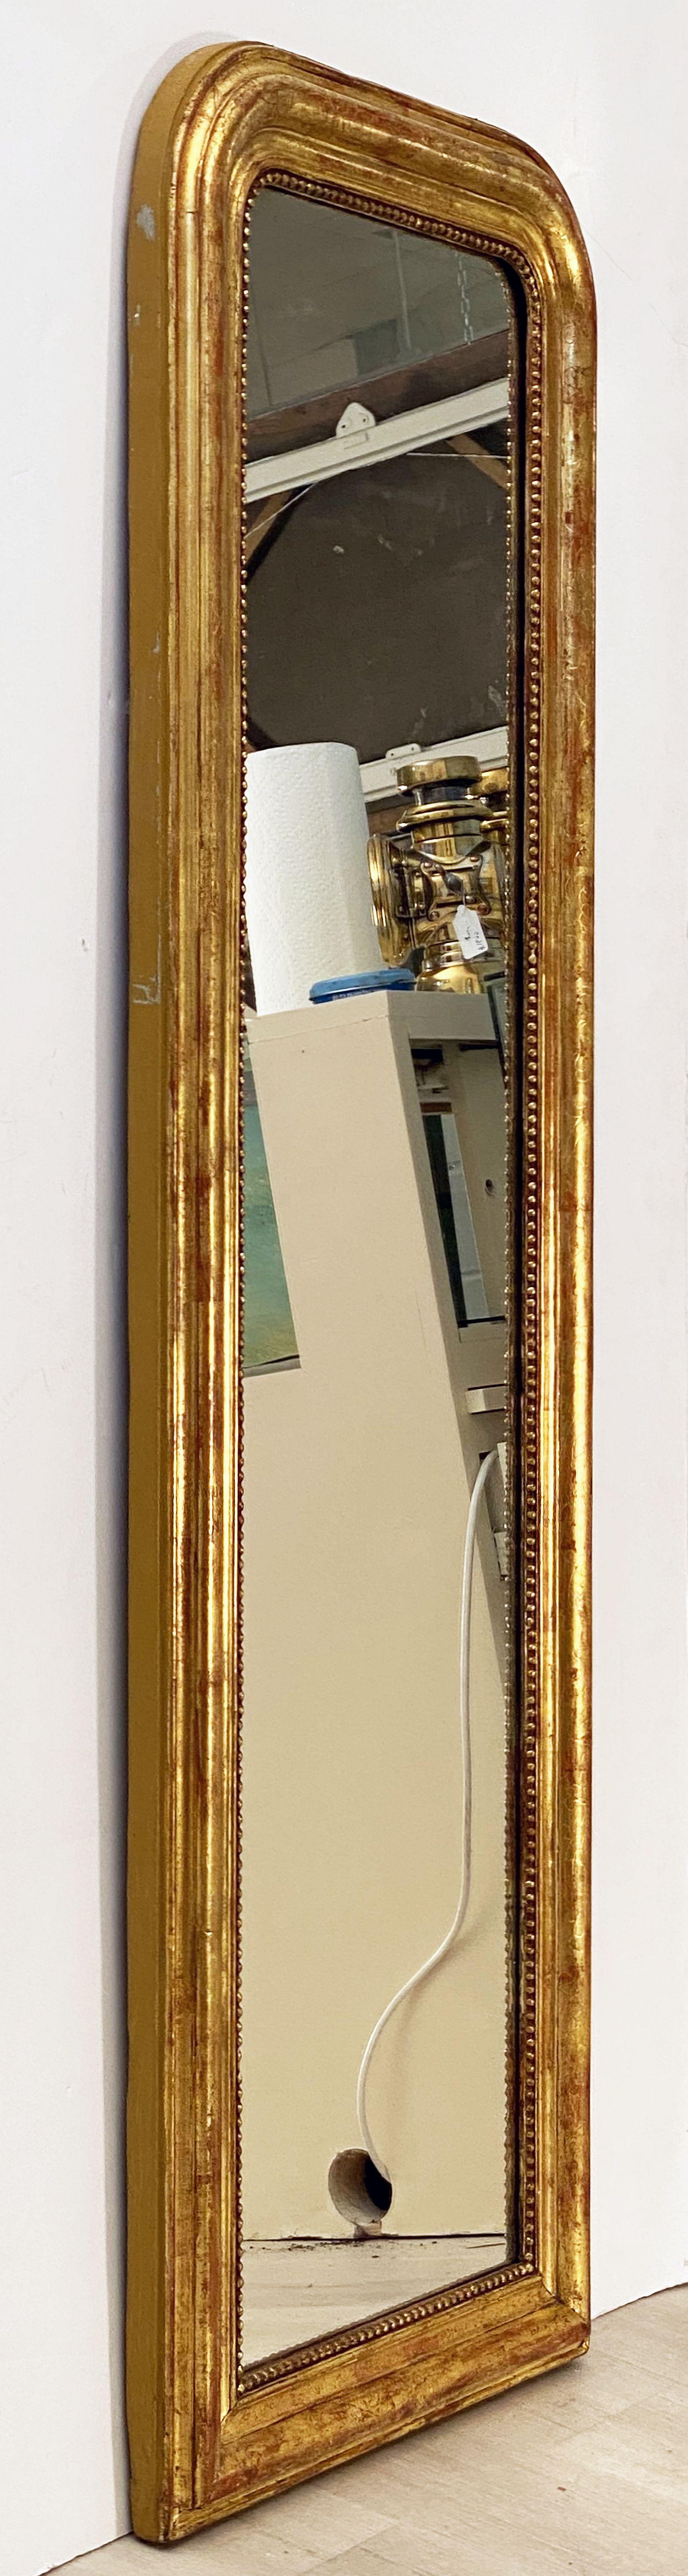 A fine Louis Philippe wall or floor or dressing mirror from France, featuring a tall narrow moulded surround with a beautiful patinated gold-leaf and lovely foliate design.

Dimensions: H 58 1/2 inches x W 19 1/2 inches

Other sizes available in